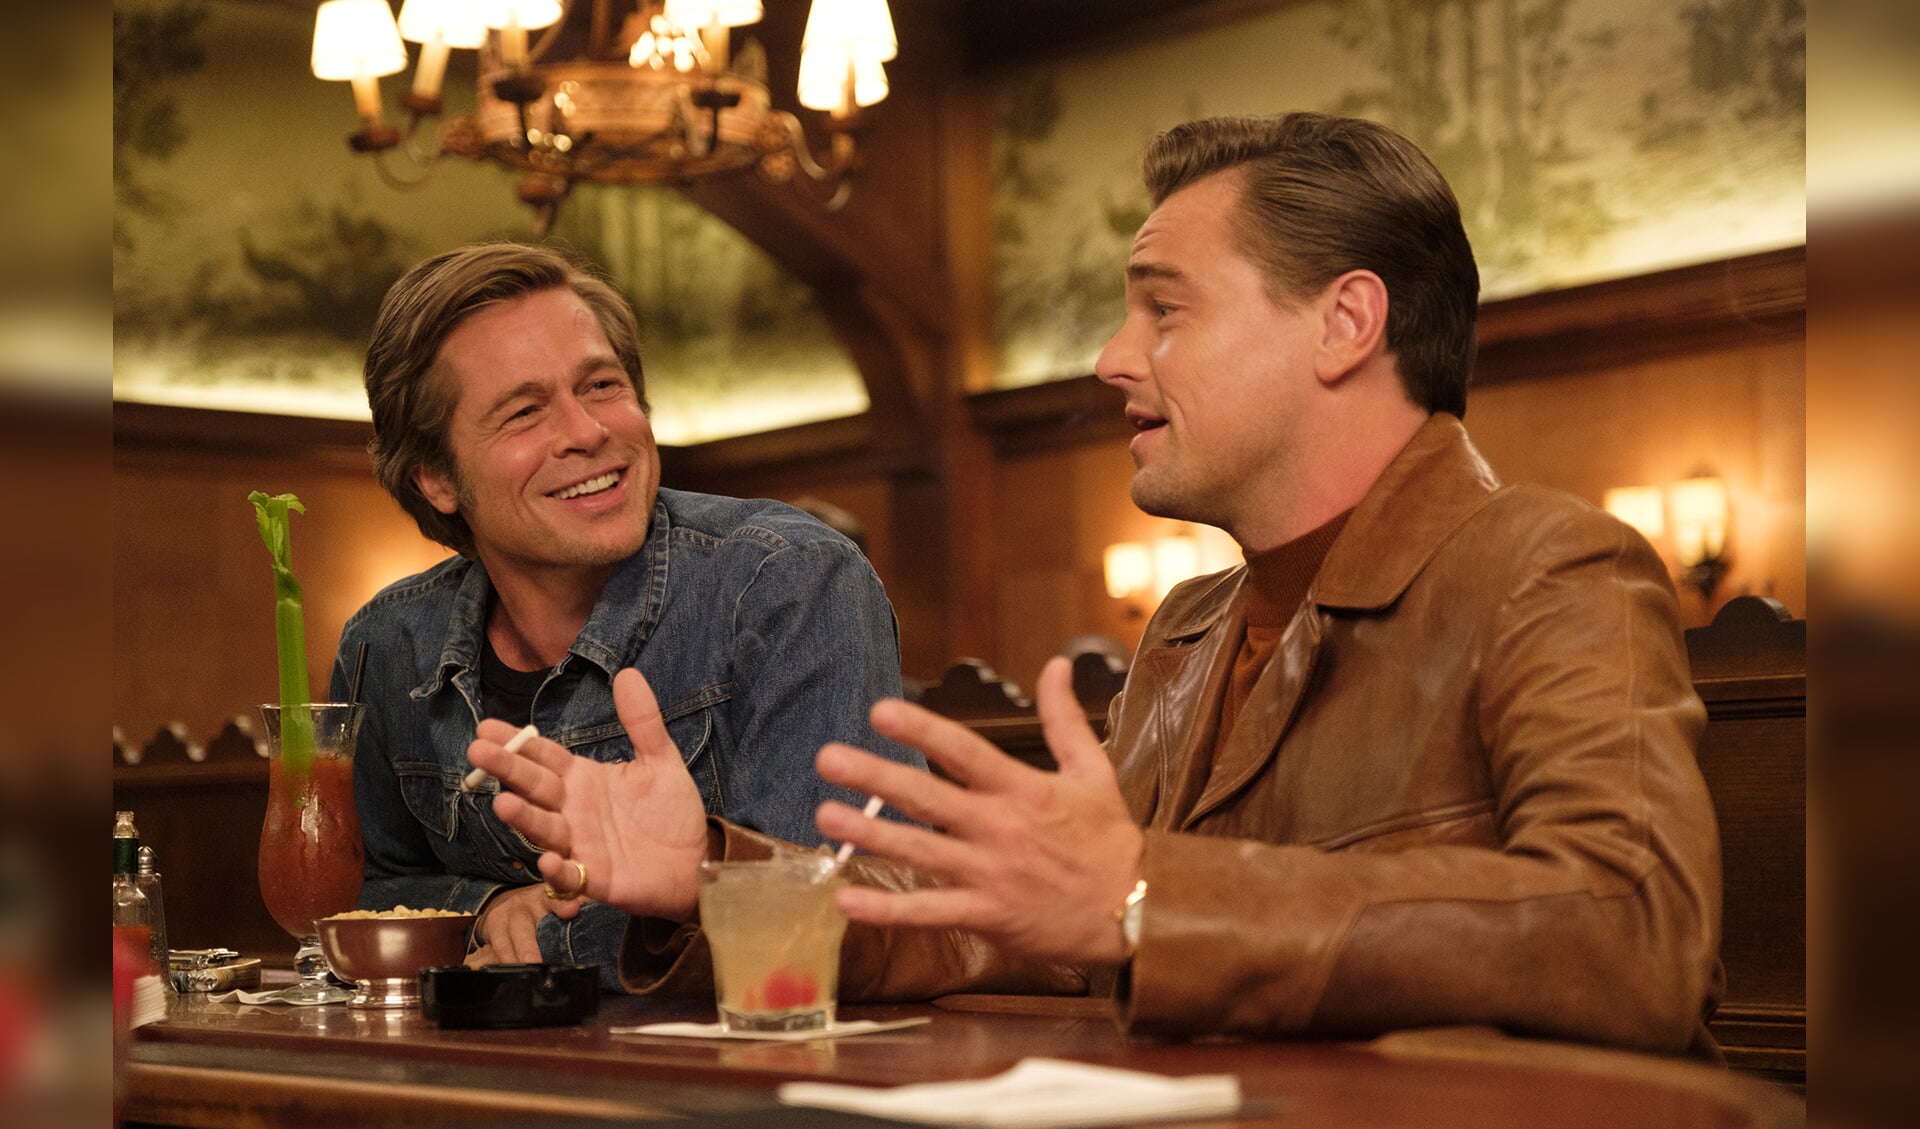 Scene uit 'Once upon a Time in Hollywood'.